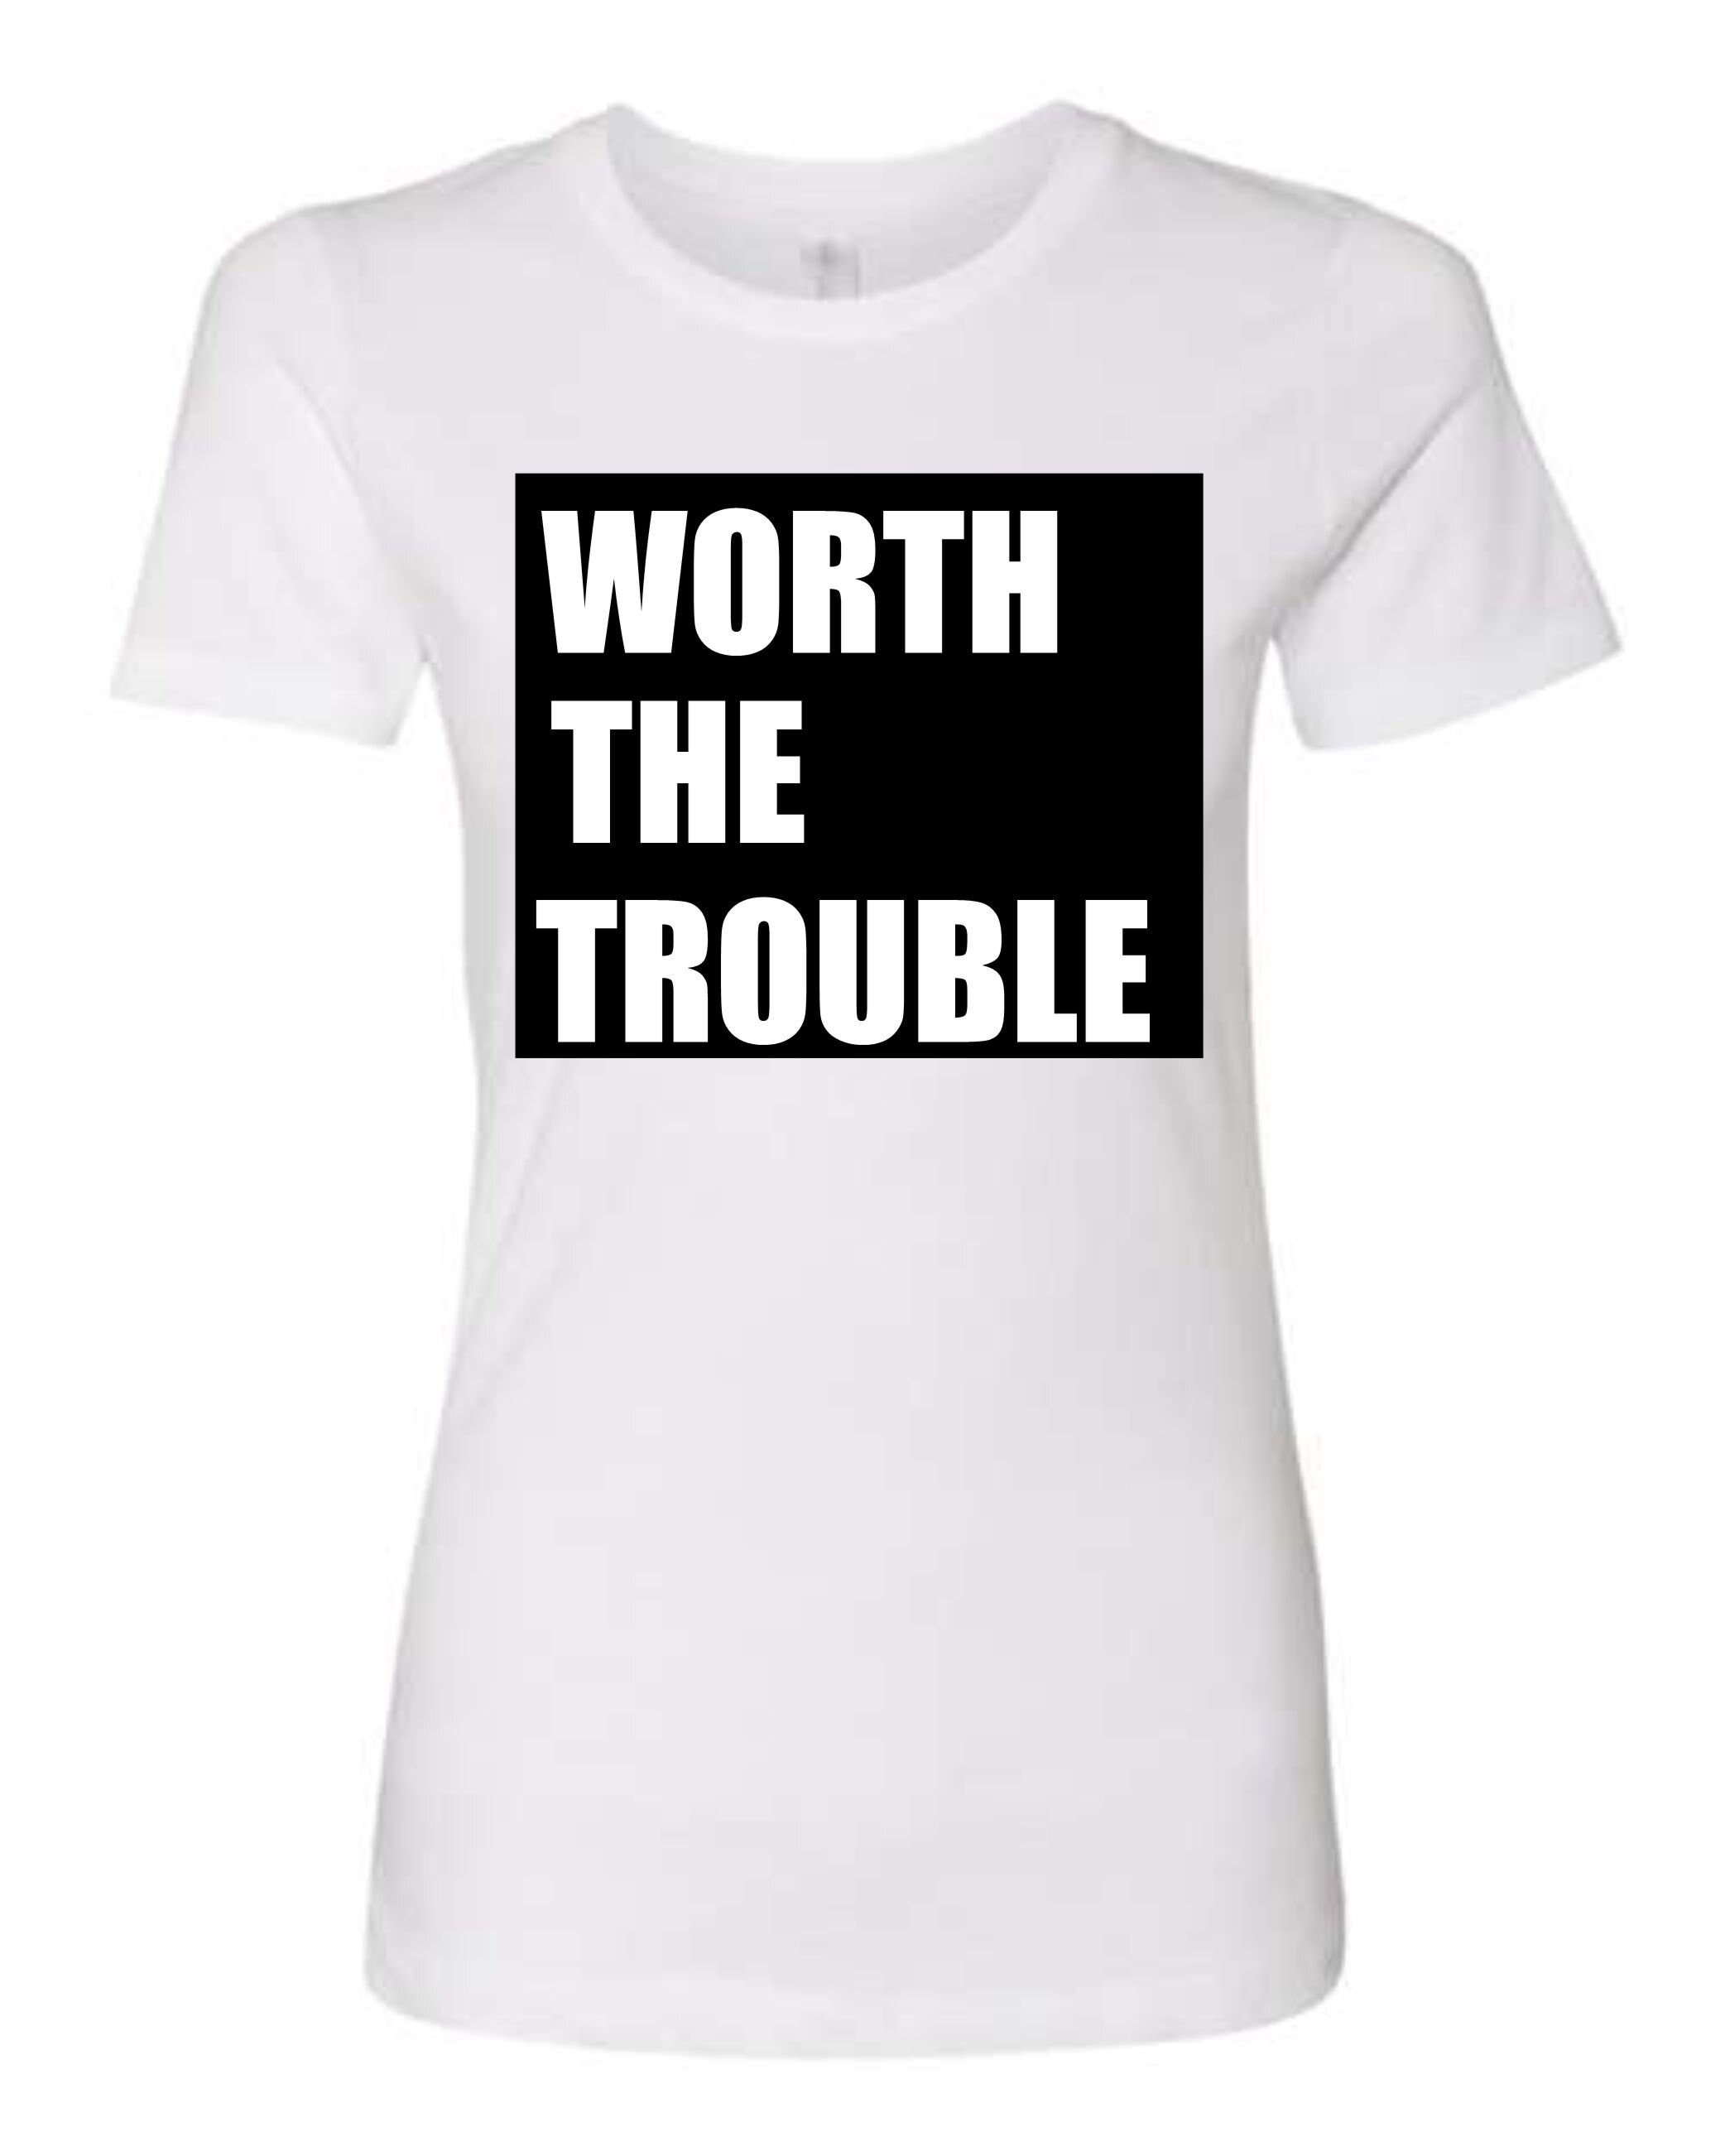 Worth the trouble | Etsy